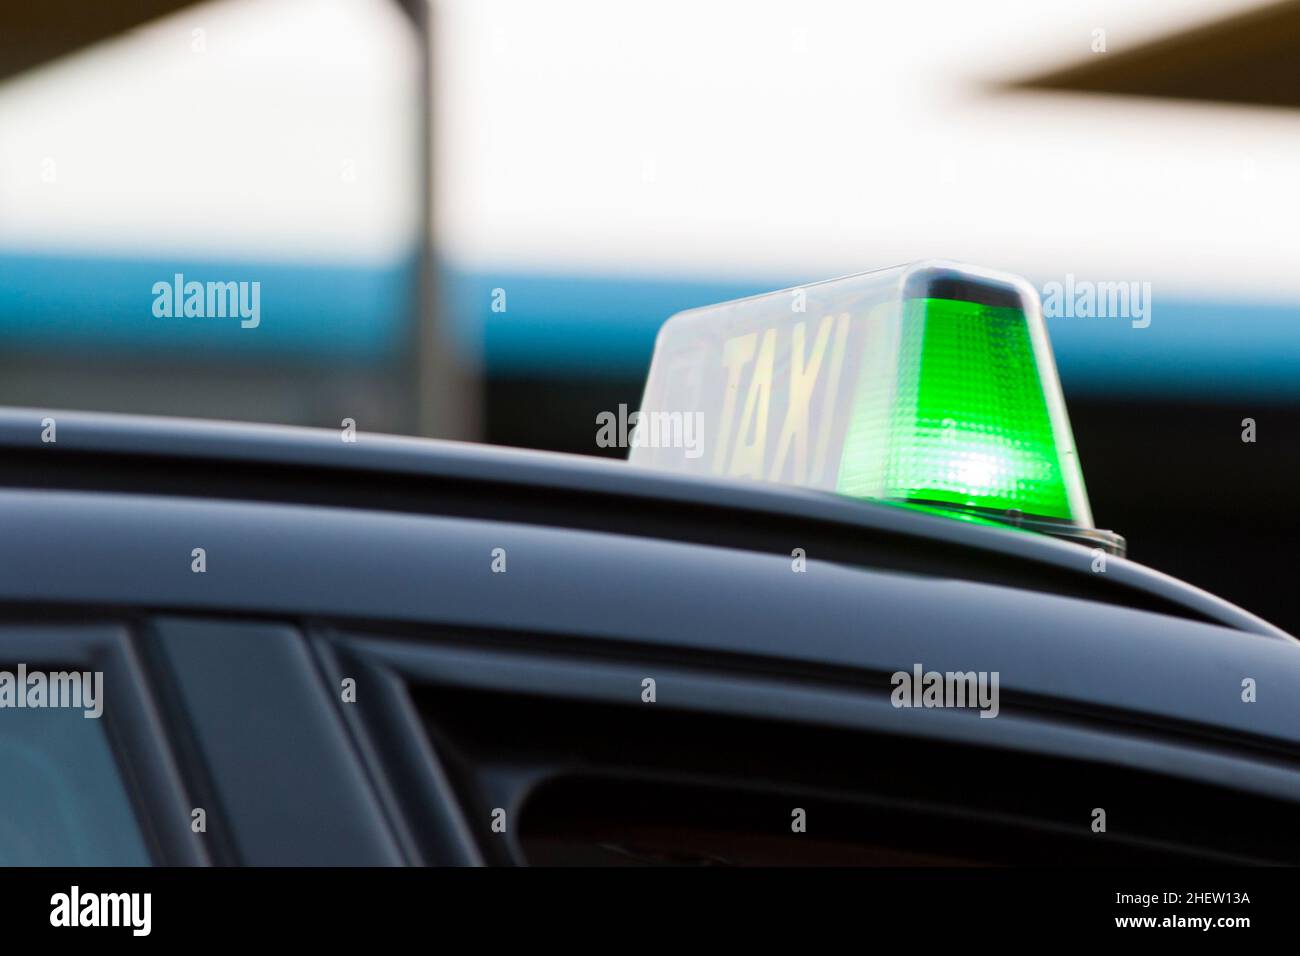 Closeup of a green light on a taxi cab indicating that it is available for hire as it waits in line Stock Photo